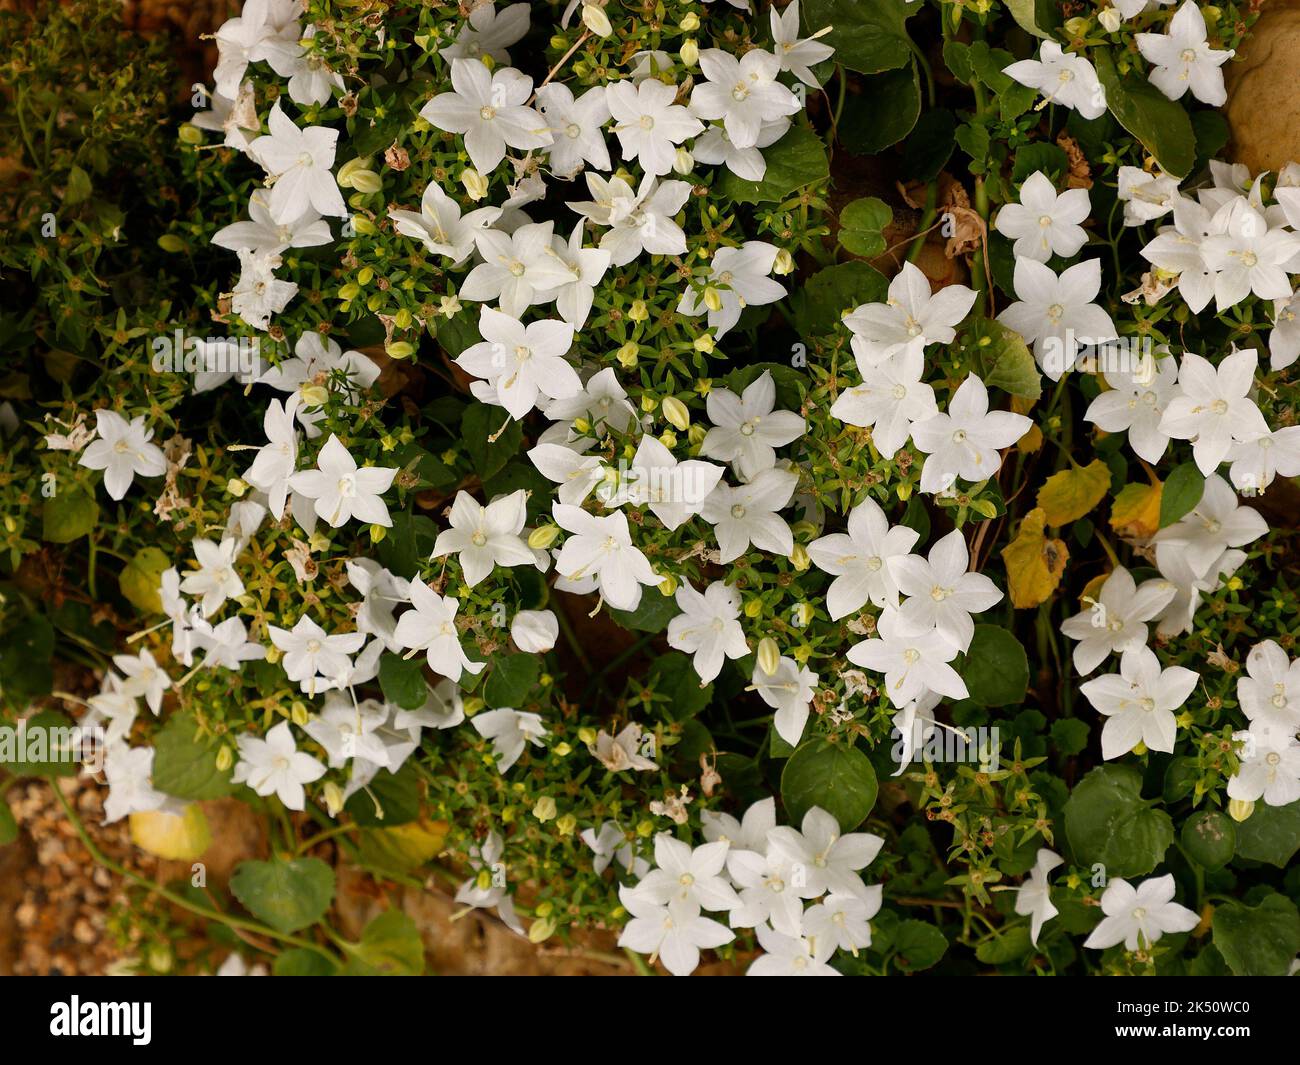 Close up of the low growing perennial garden plant Campanula isophylla Alba with pure white flowers flowering in summer and autumn. Stock Photo